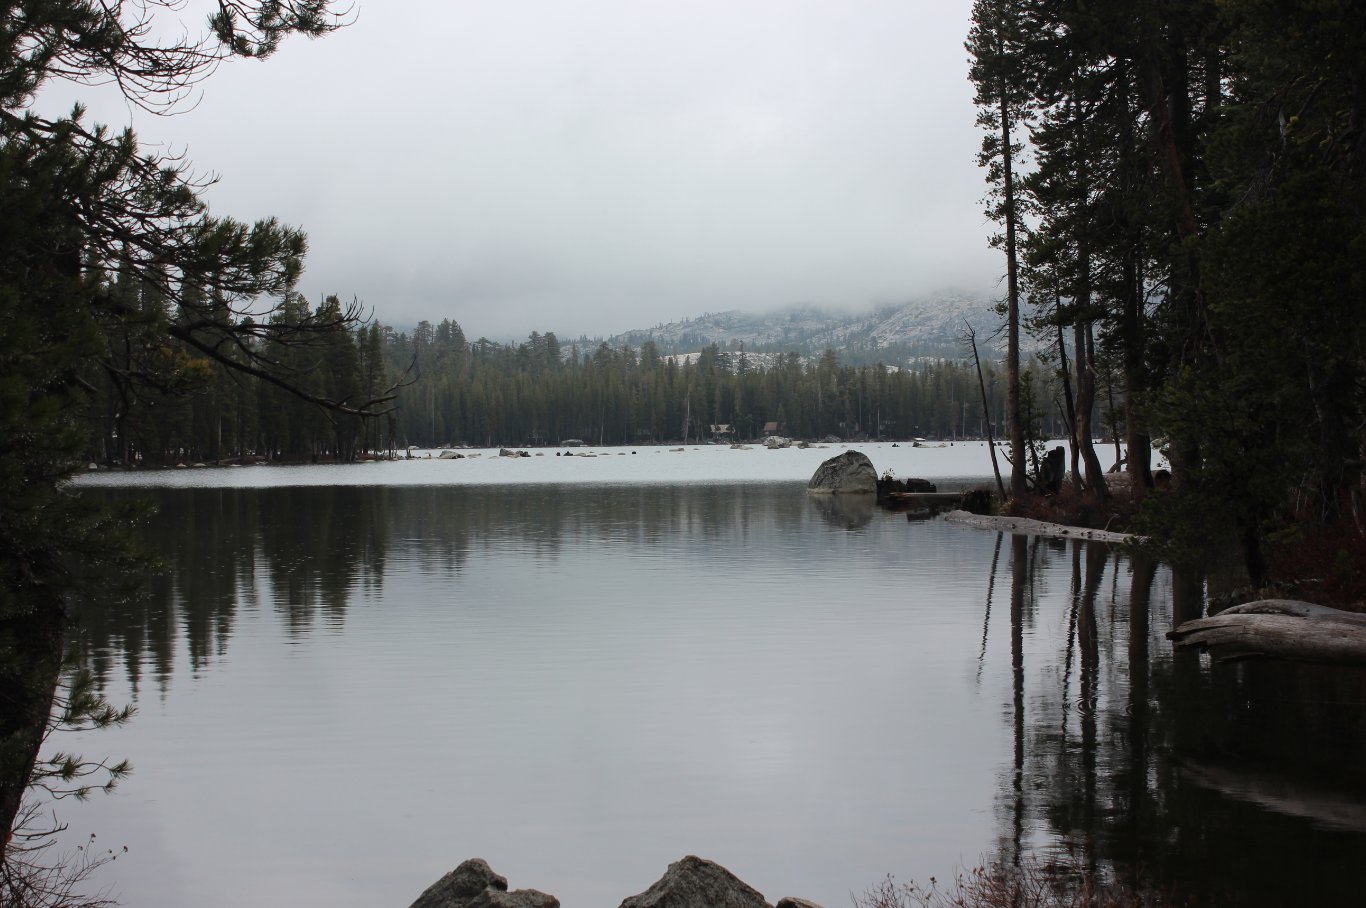 Wrights Lake in the early spring